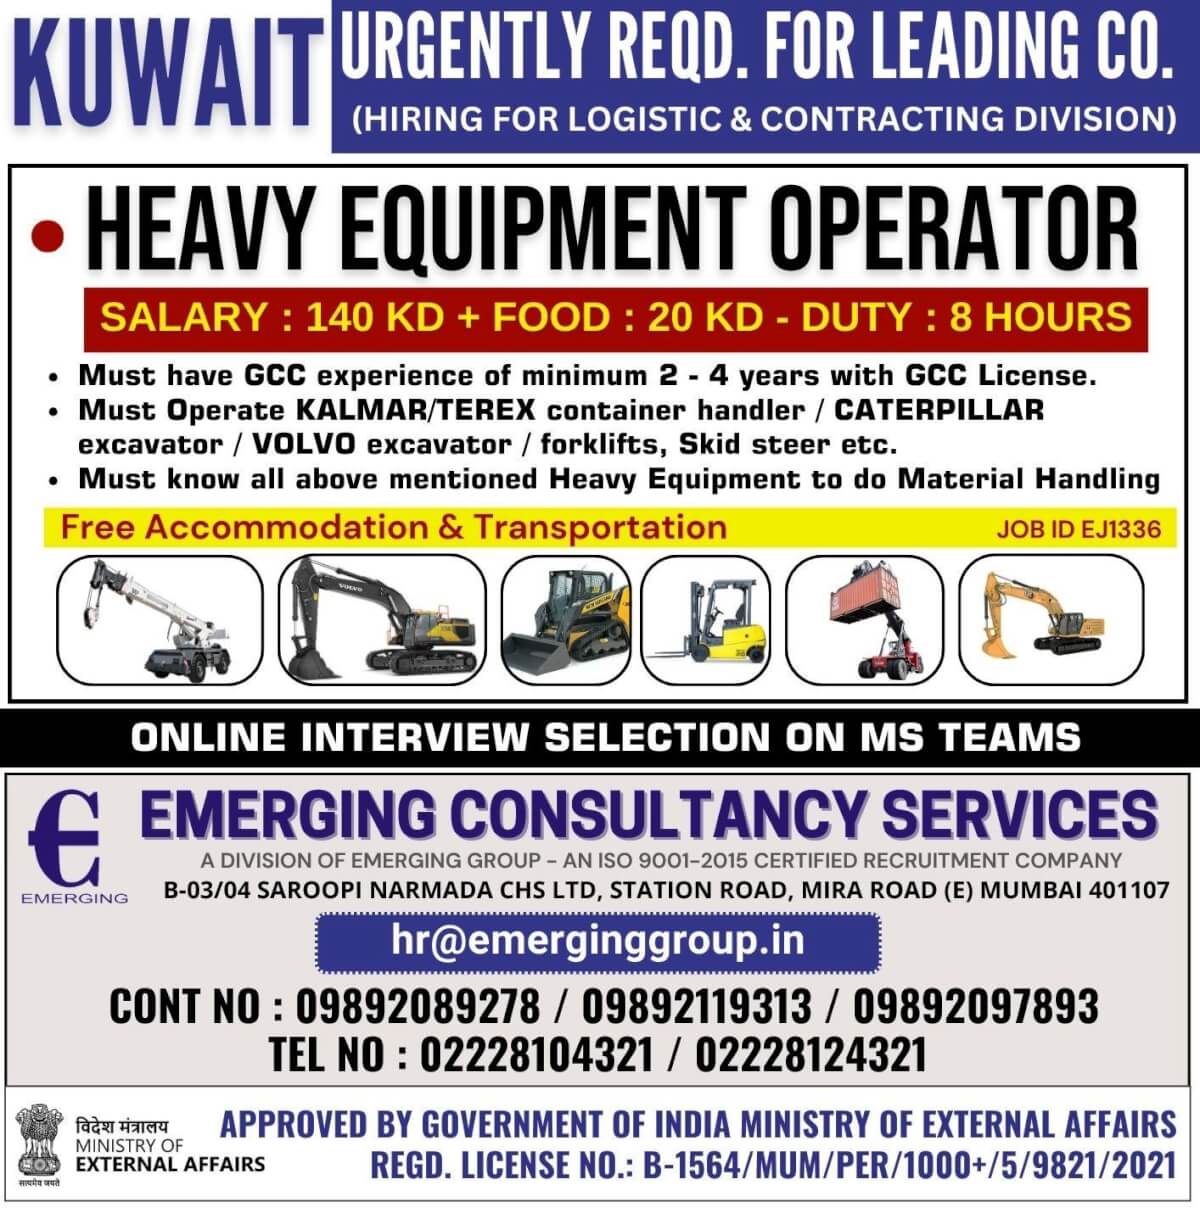 ONLINE CLIENT INTERVIEW SOON FOR LEADING COMPANY IN KUWAIT